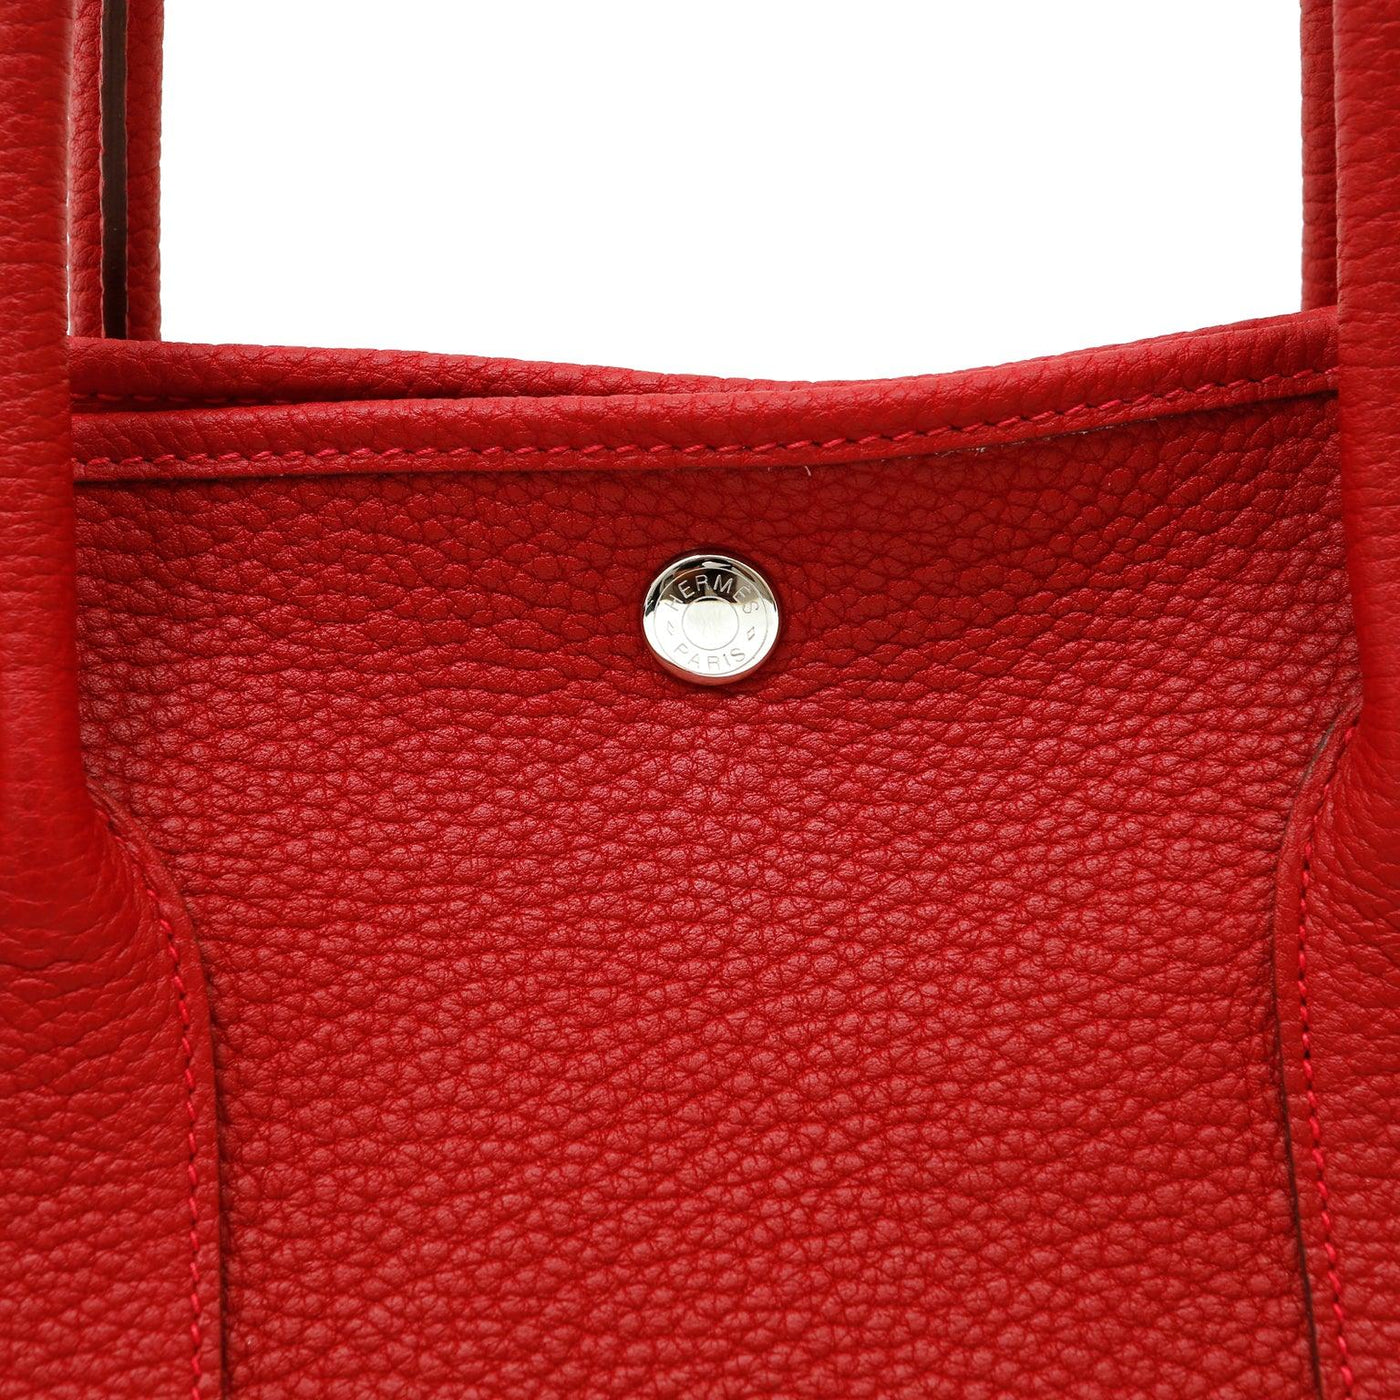 Hermes Red Garden Party Negonda Leather Bag - Only Authentics